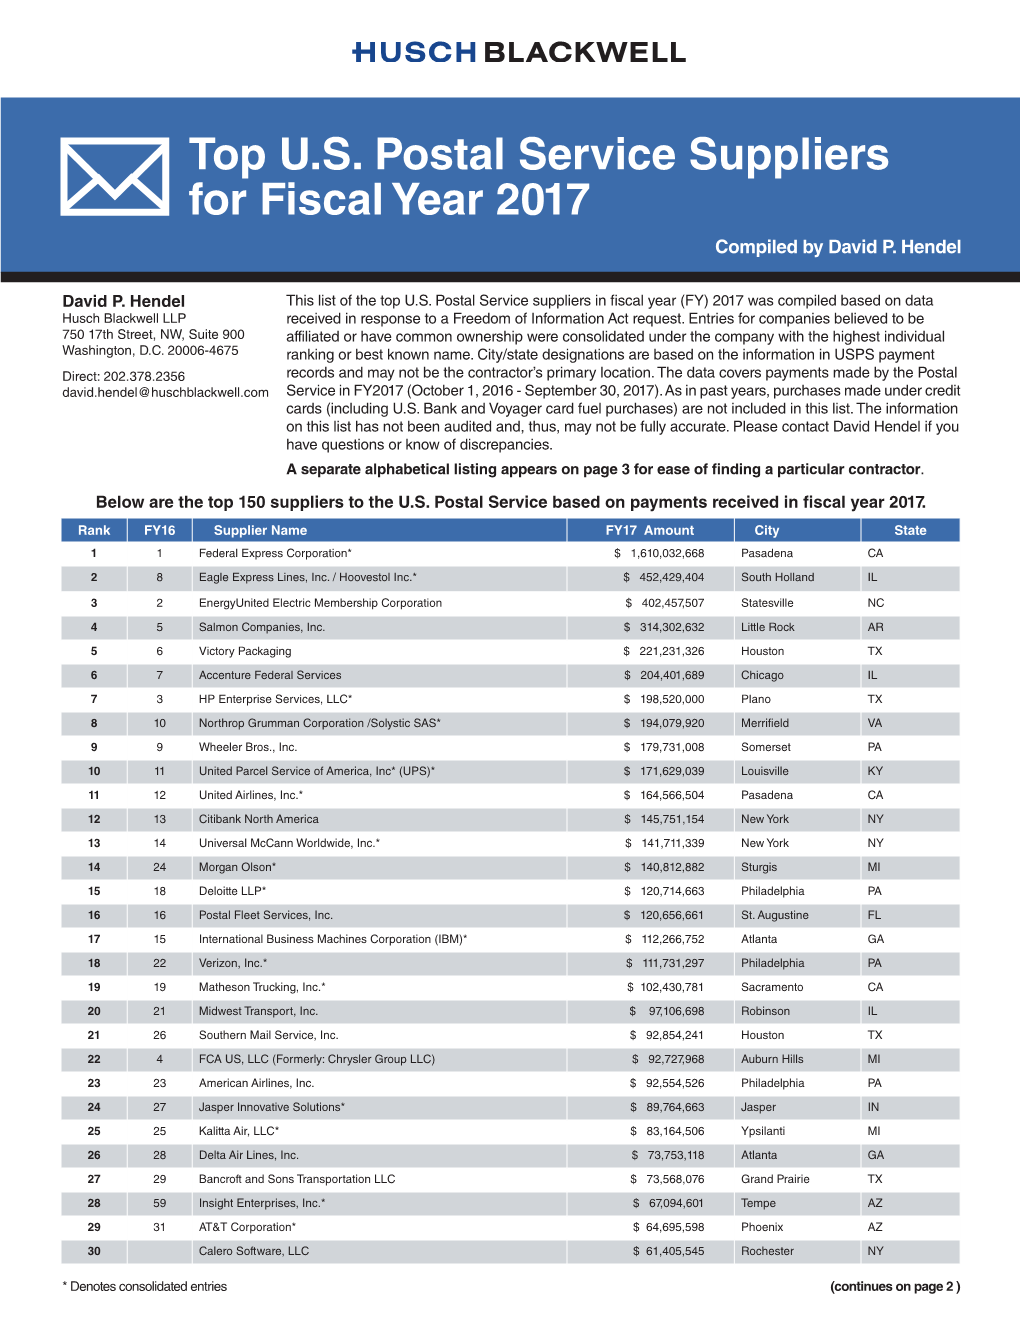 Top U.S. Postal Service Suppliers for Fiscal Year 2017 Compiled by David P